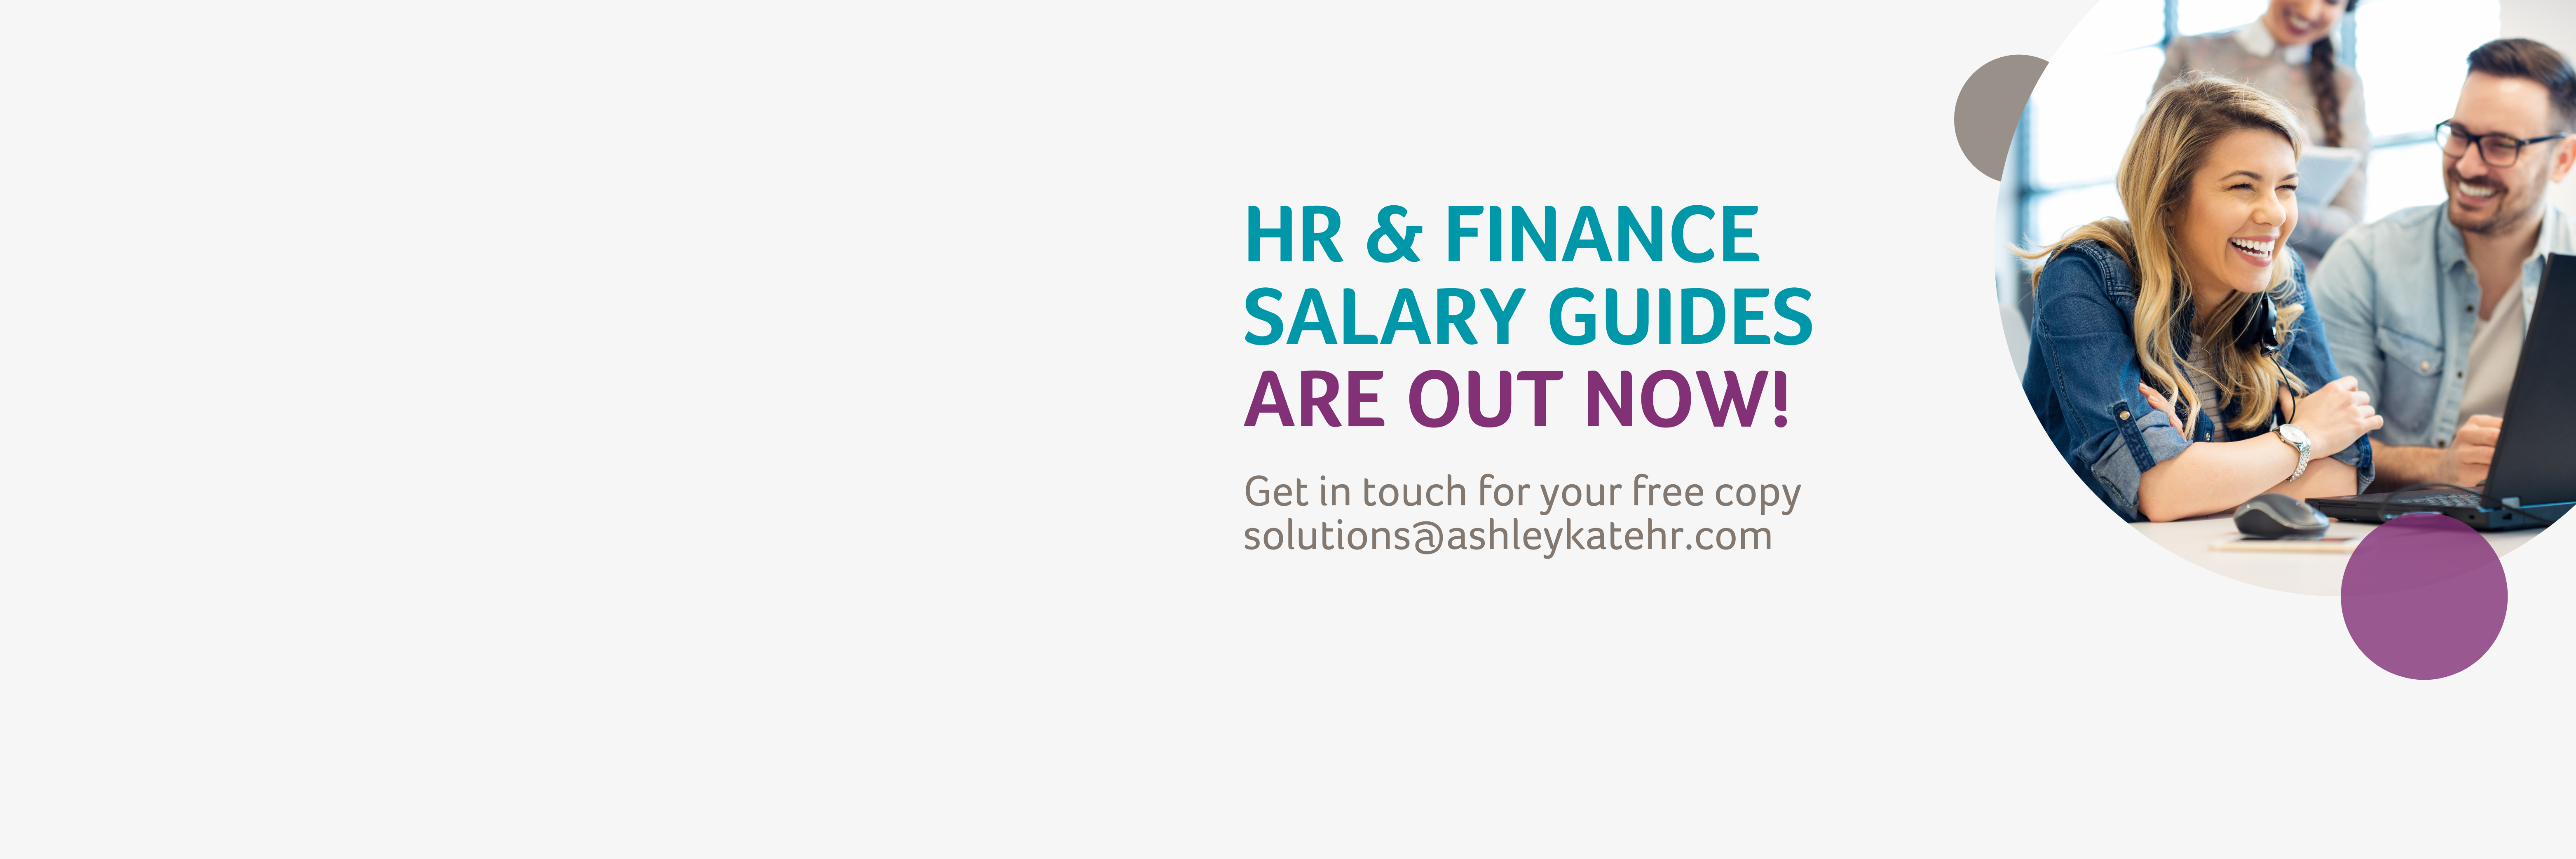 HR & Finance Salary Guides